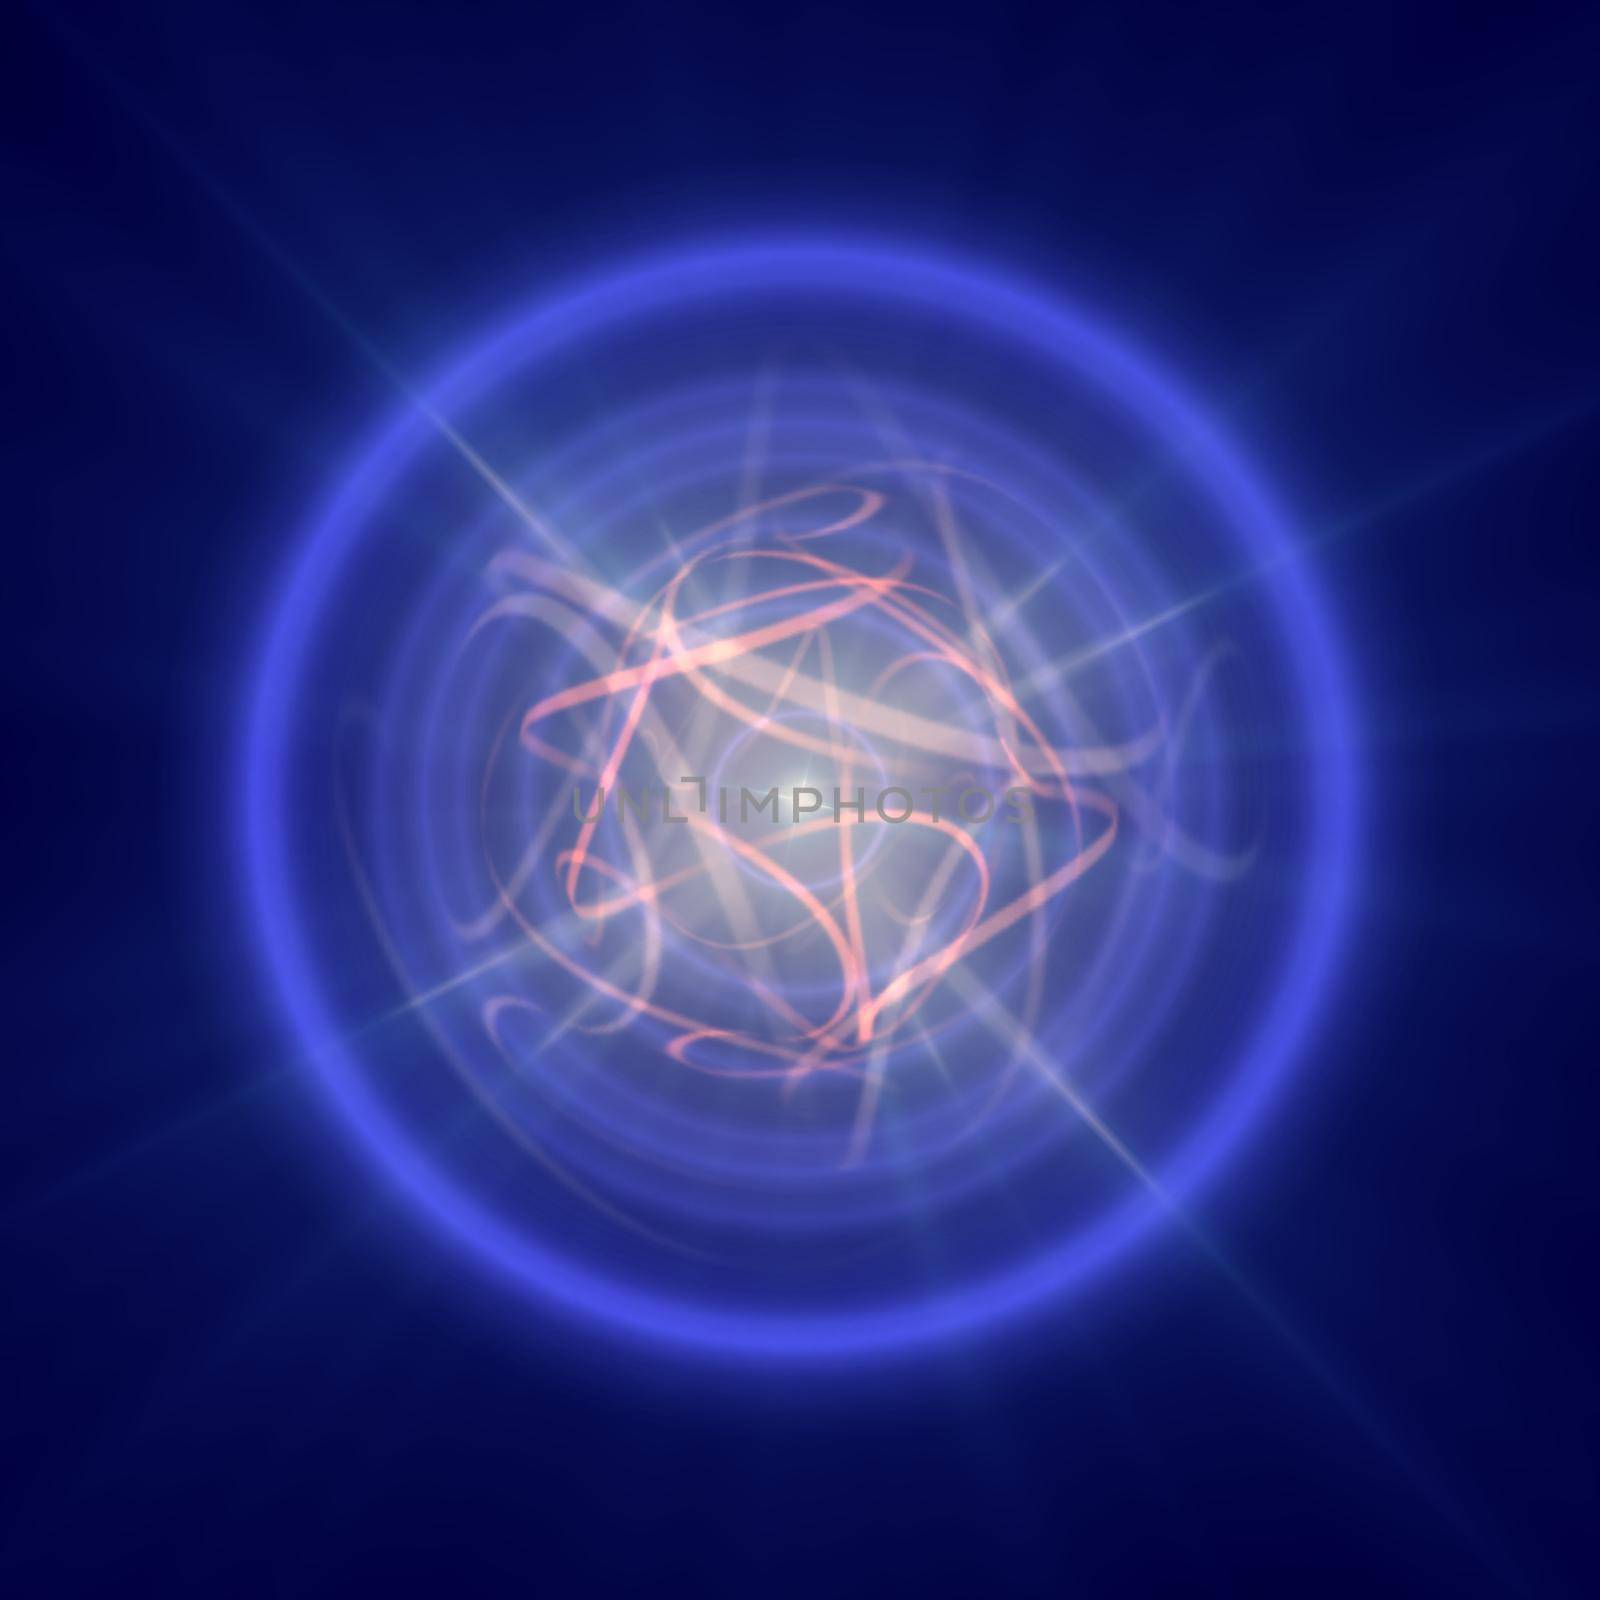 Highly magnetized rotating neutron star, abstract illustration